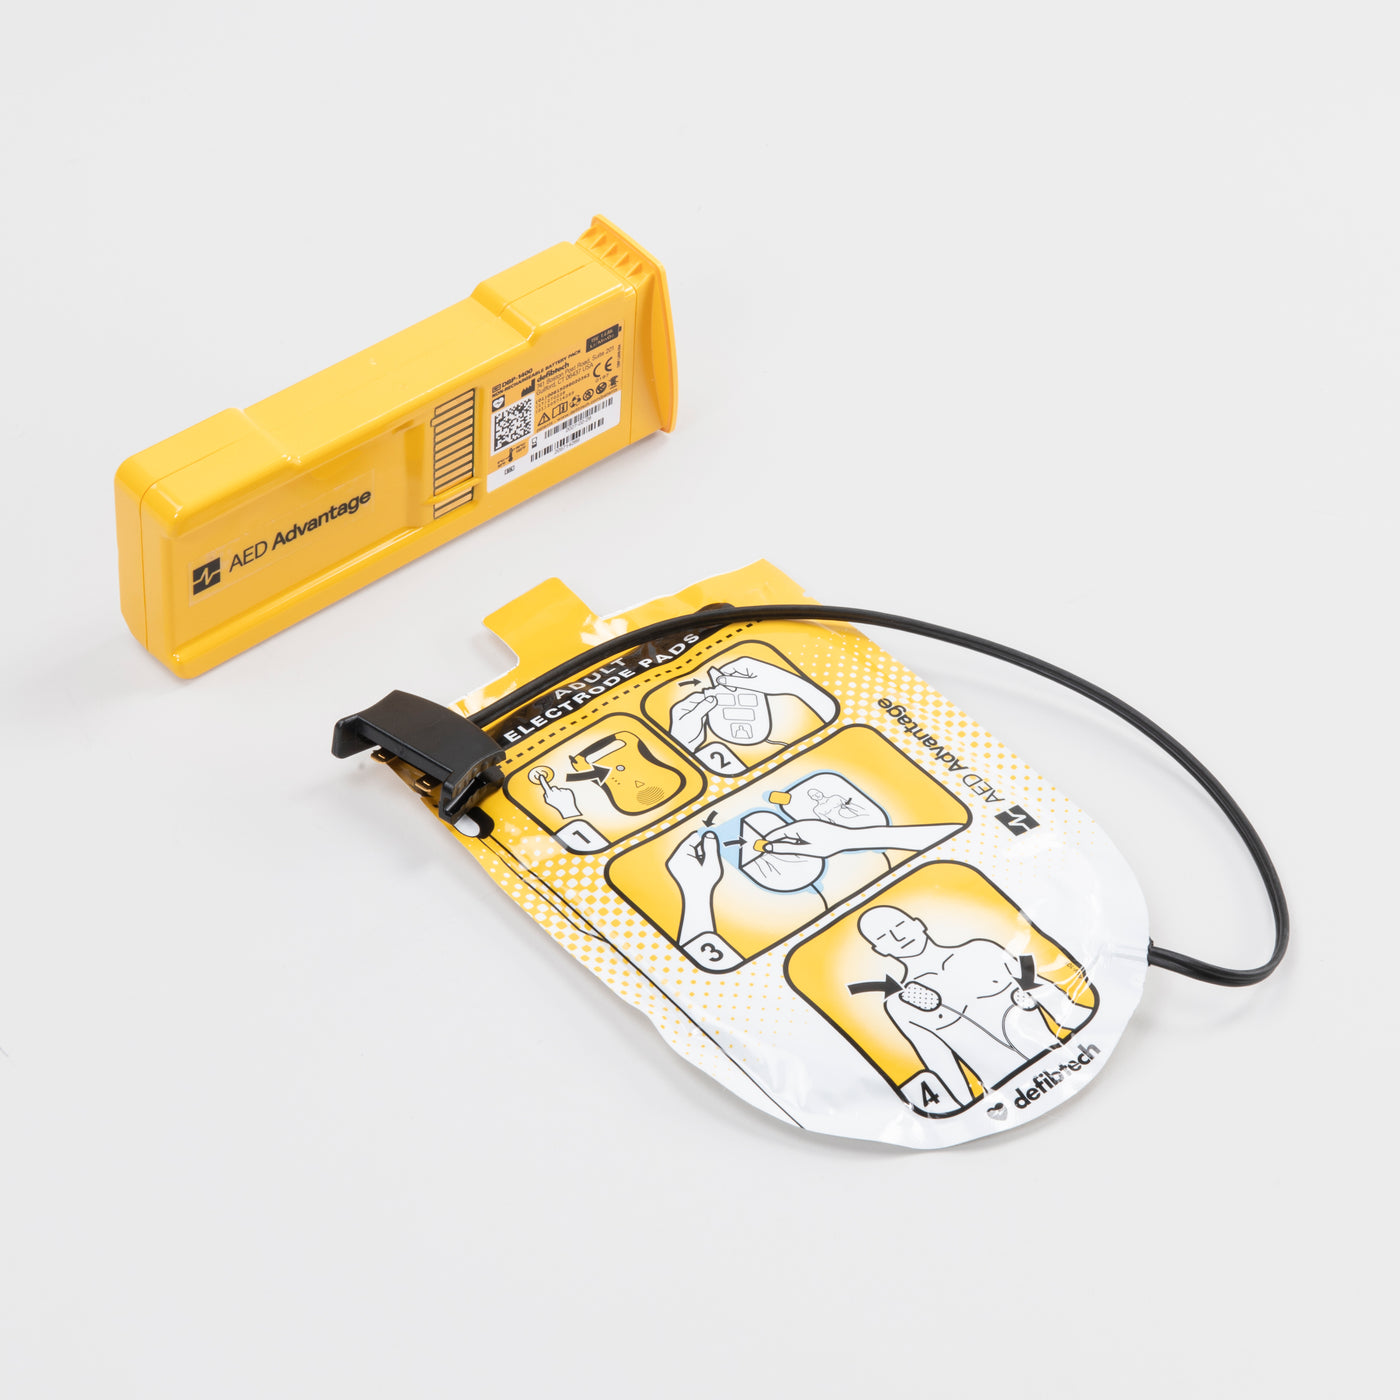 Yellow electrodes package and yellow battery pack for the Defibtech LIifeline VIEW defibrillator